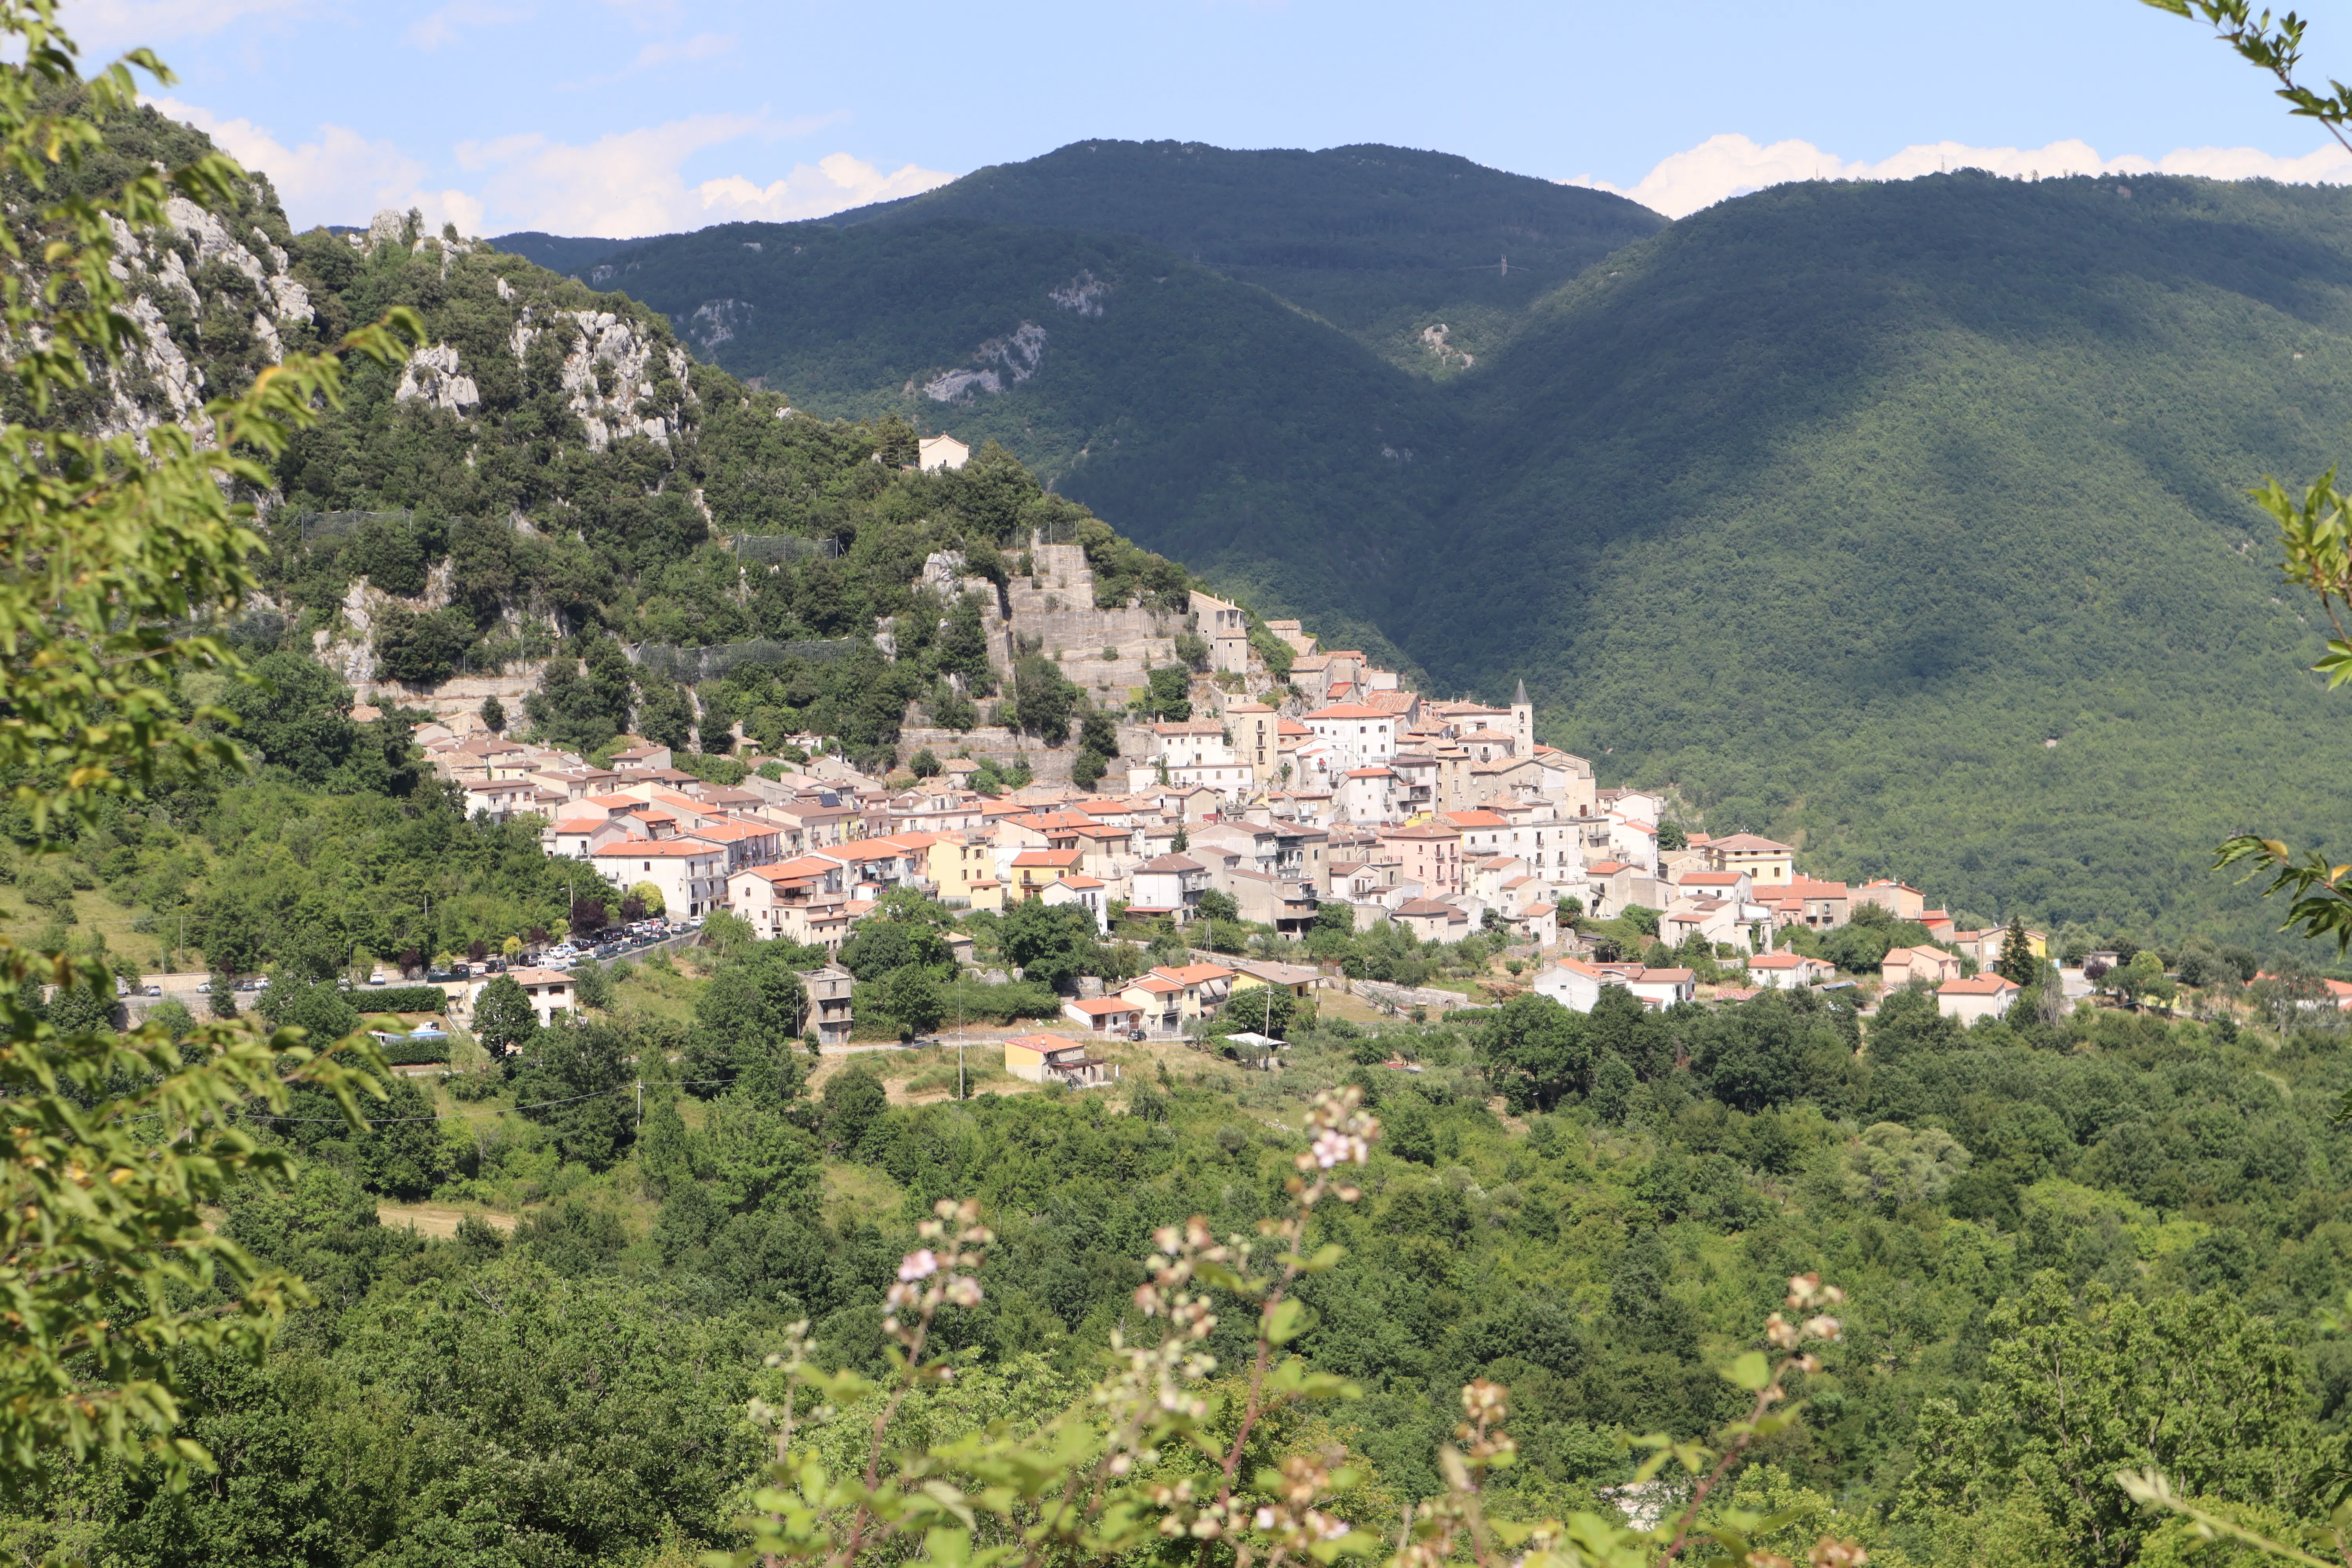 a view of medieval village tucked into mountainside